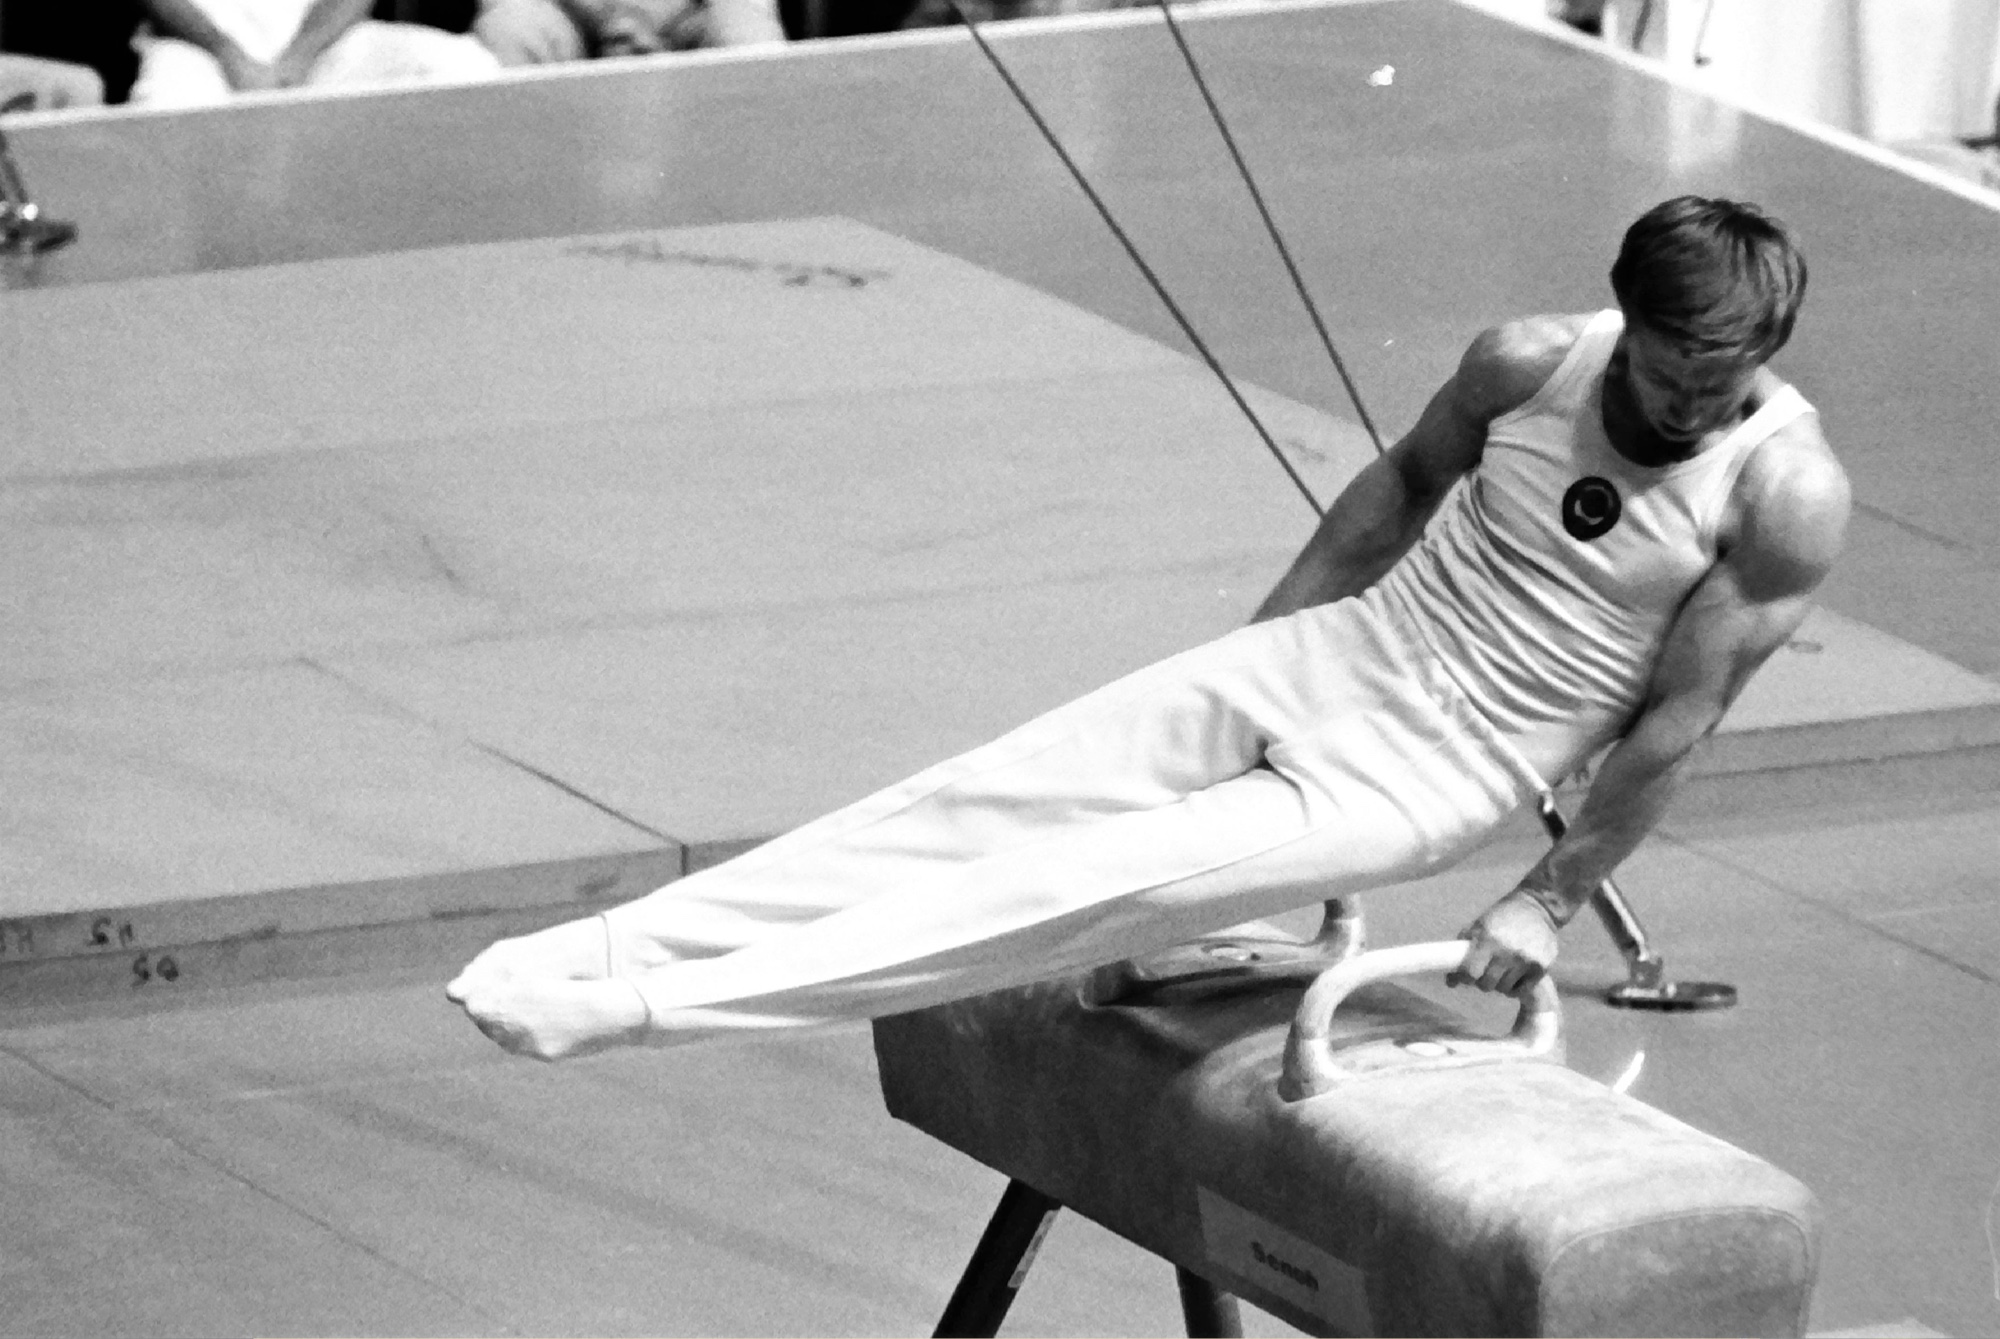 Nikolai Andrianov competing on Pommel at the 1976 Monteal Olympic Games